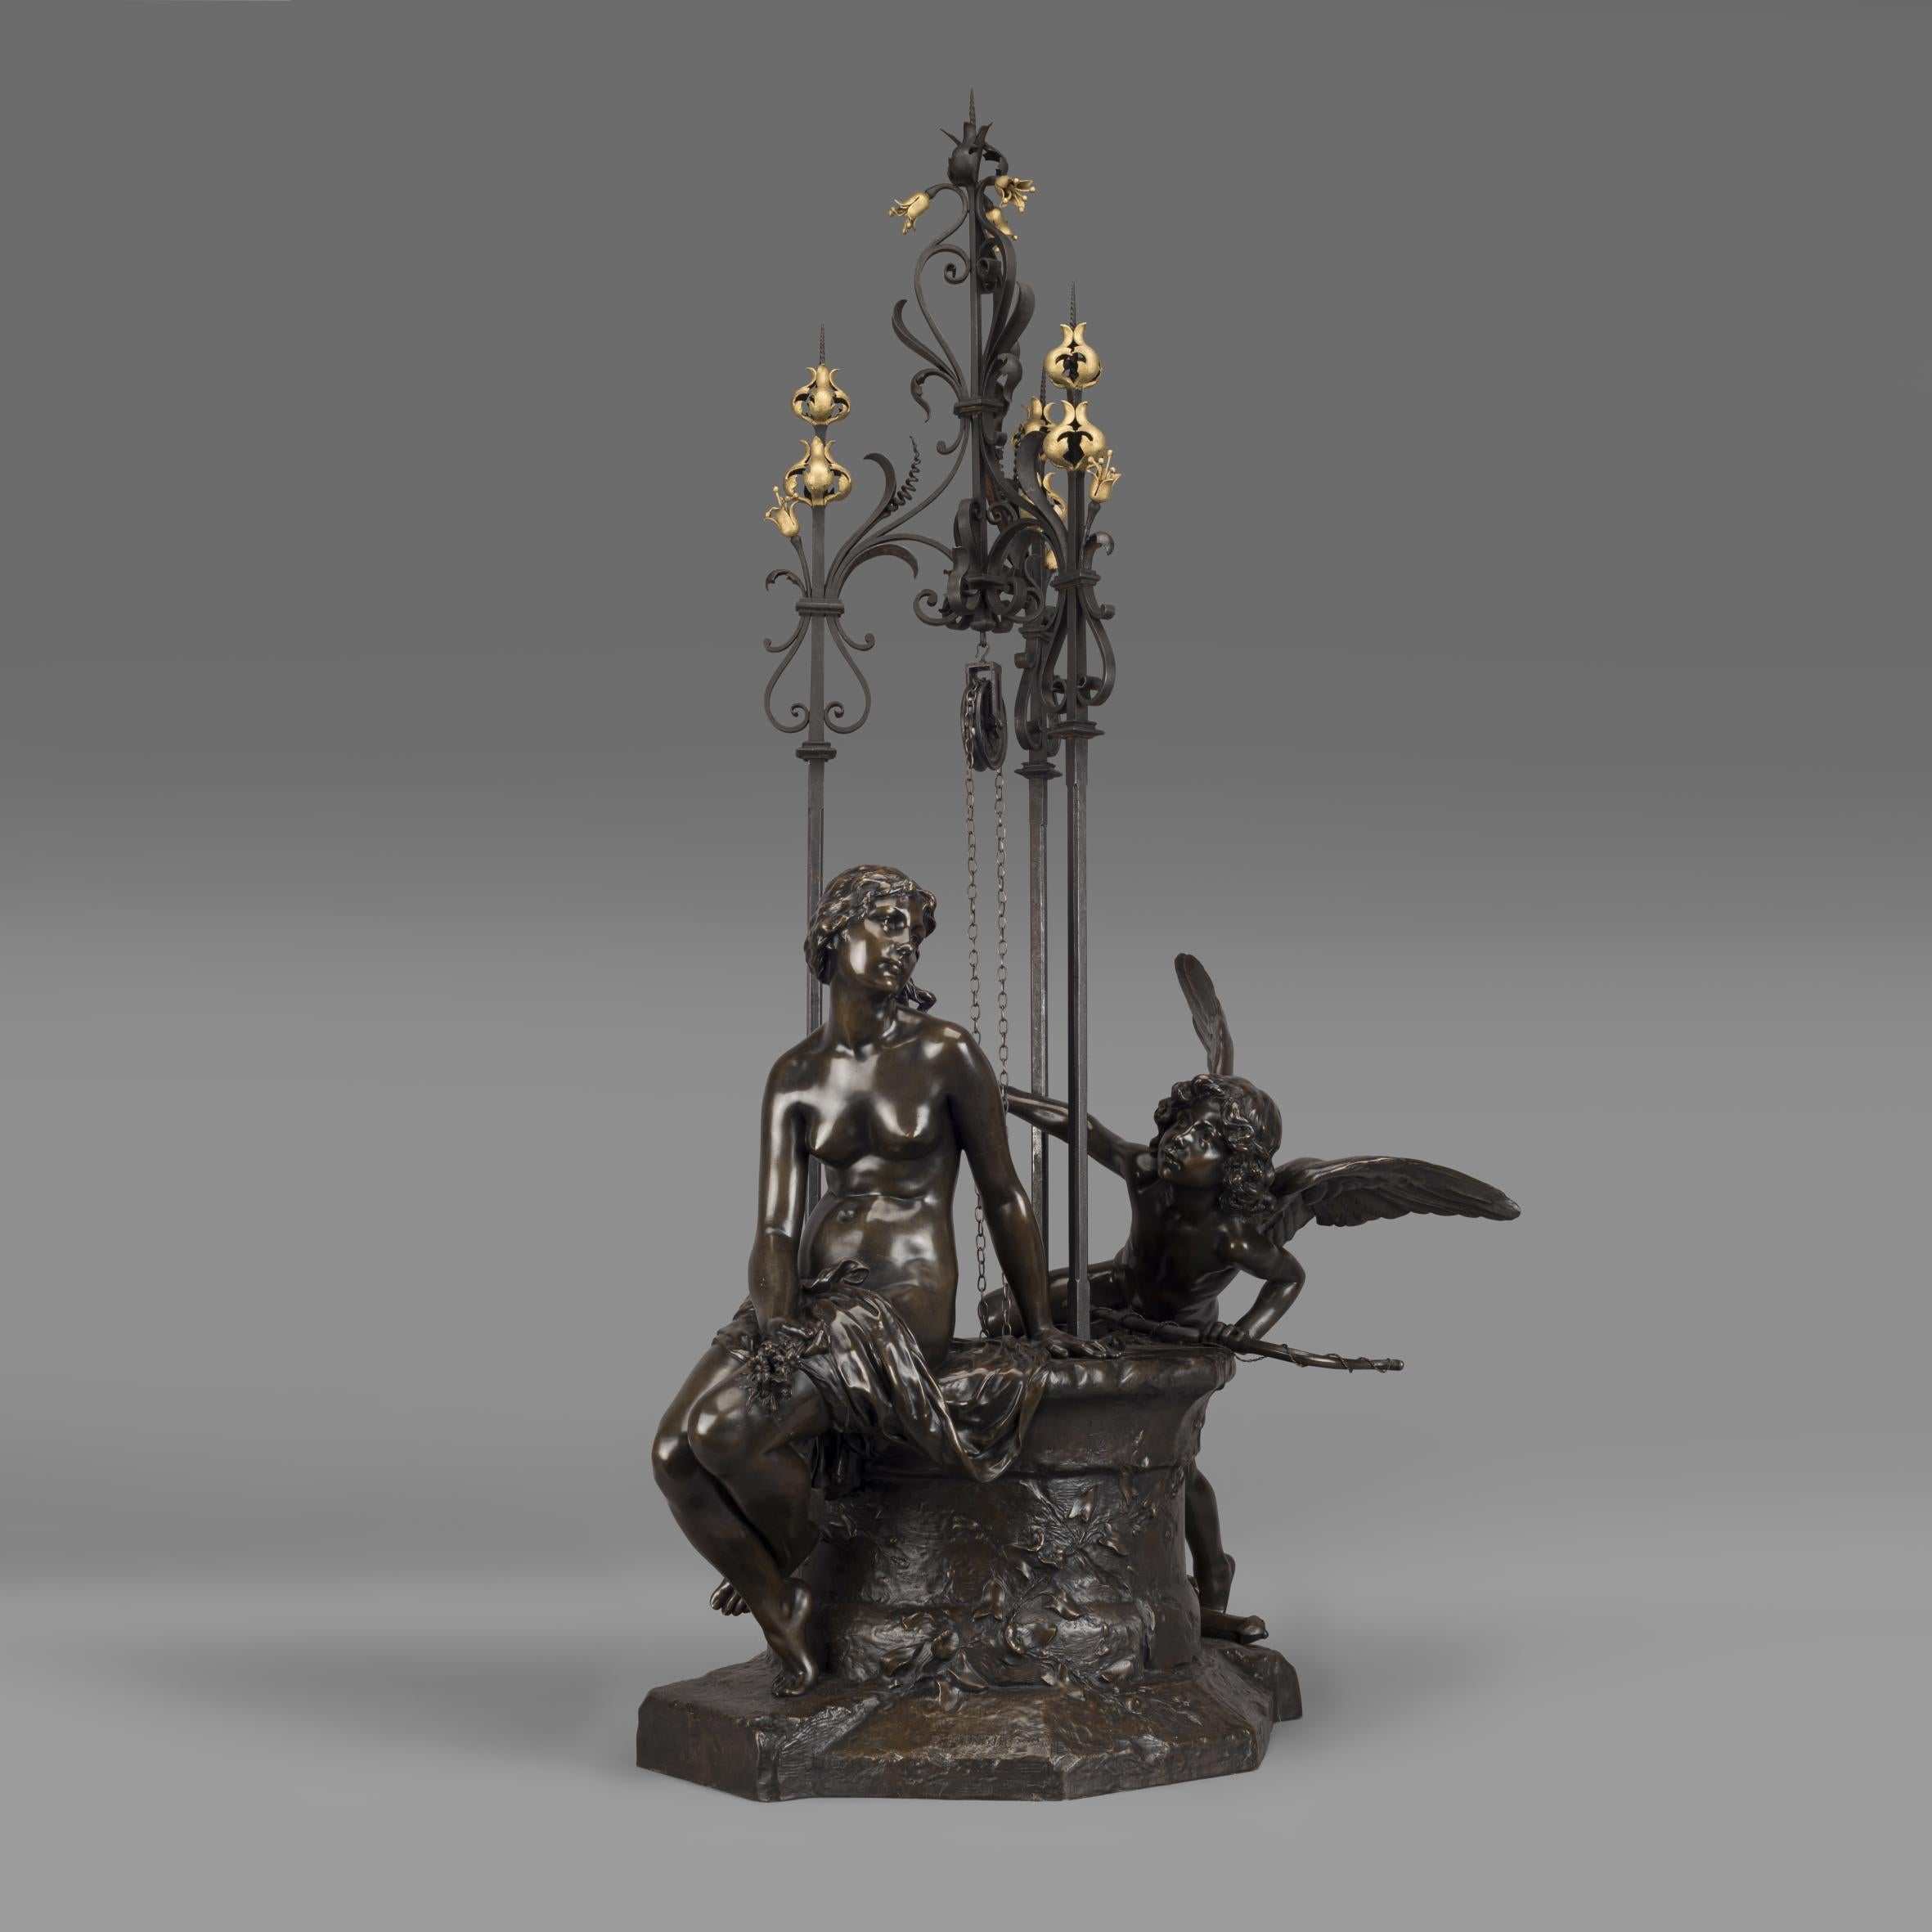 'Le Puits Qui Parle' (The Speaking Well) - An Important Exhibition Bronze Group, by Paul Eugène Mengin.

Signed to the cast 'P MENGIN', and inscribed 'Susse Fres Edts, Paris', and with foundry mark 'SUSSE FRERES EDITEURS/ PARIS'. 

First